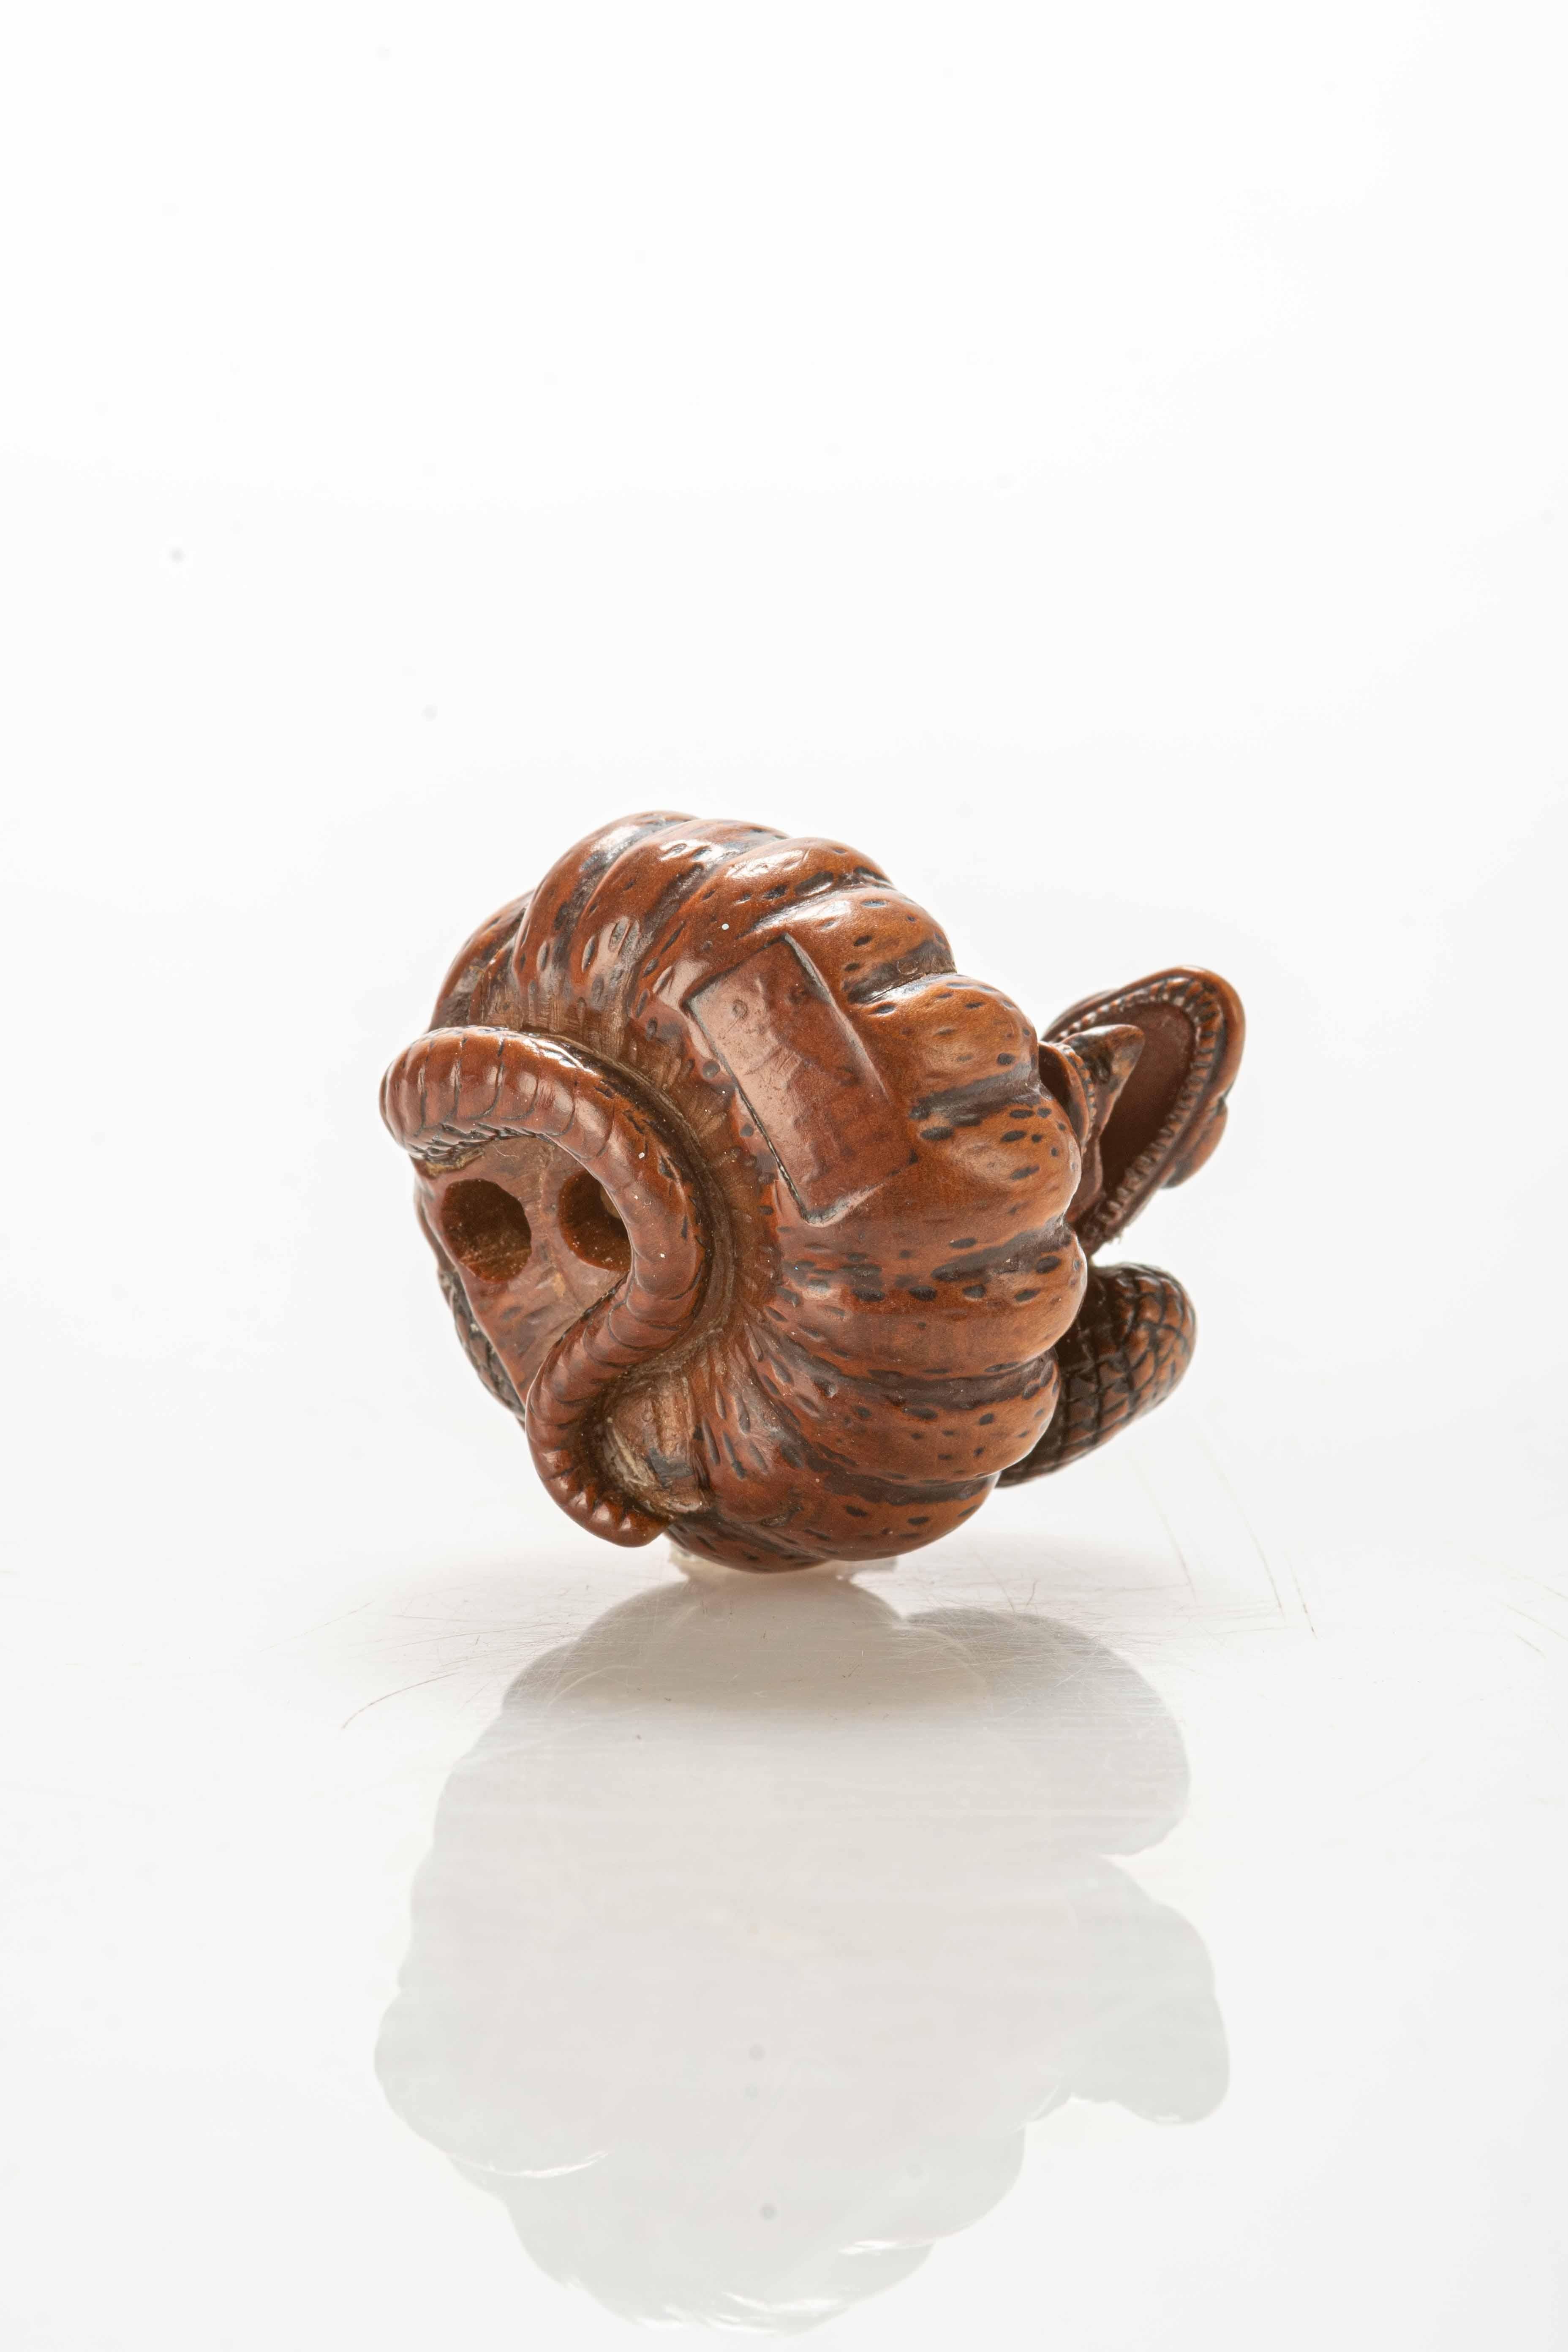 Japanese A boxwood netsuke depicting a snake wrapping around a pumpkin For Sale